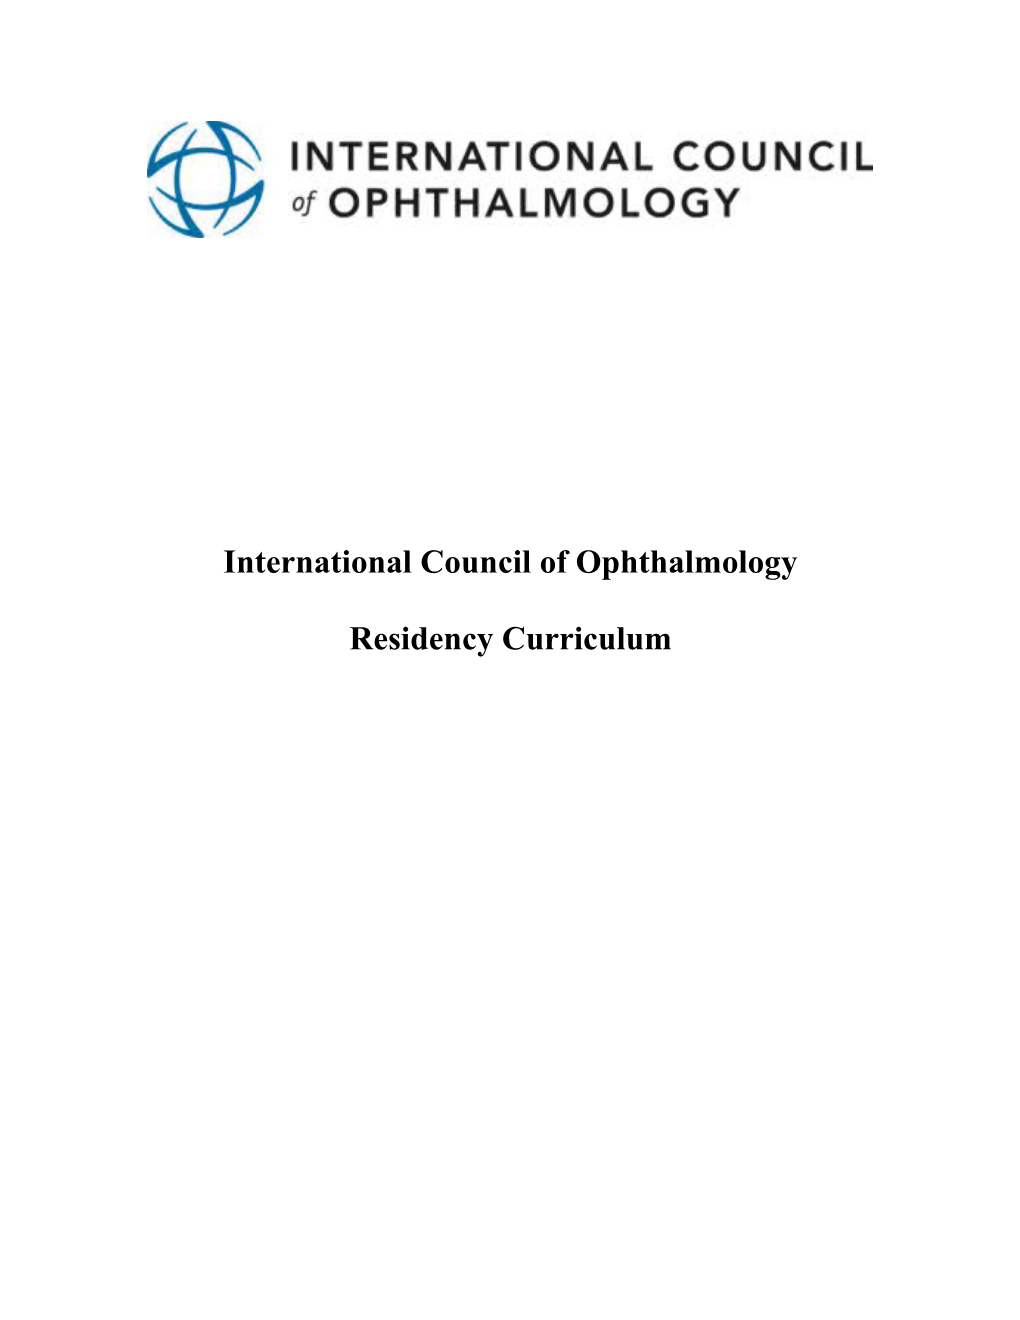 International Council of Ophthalmology